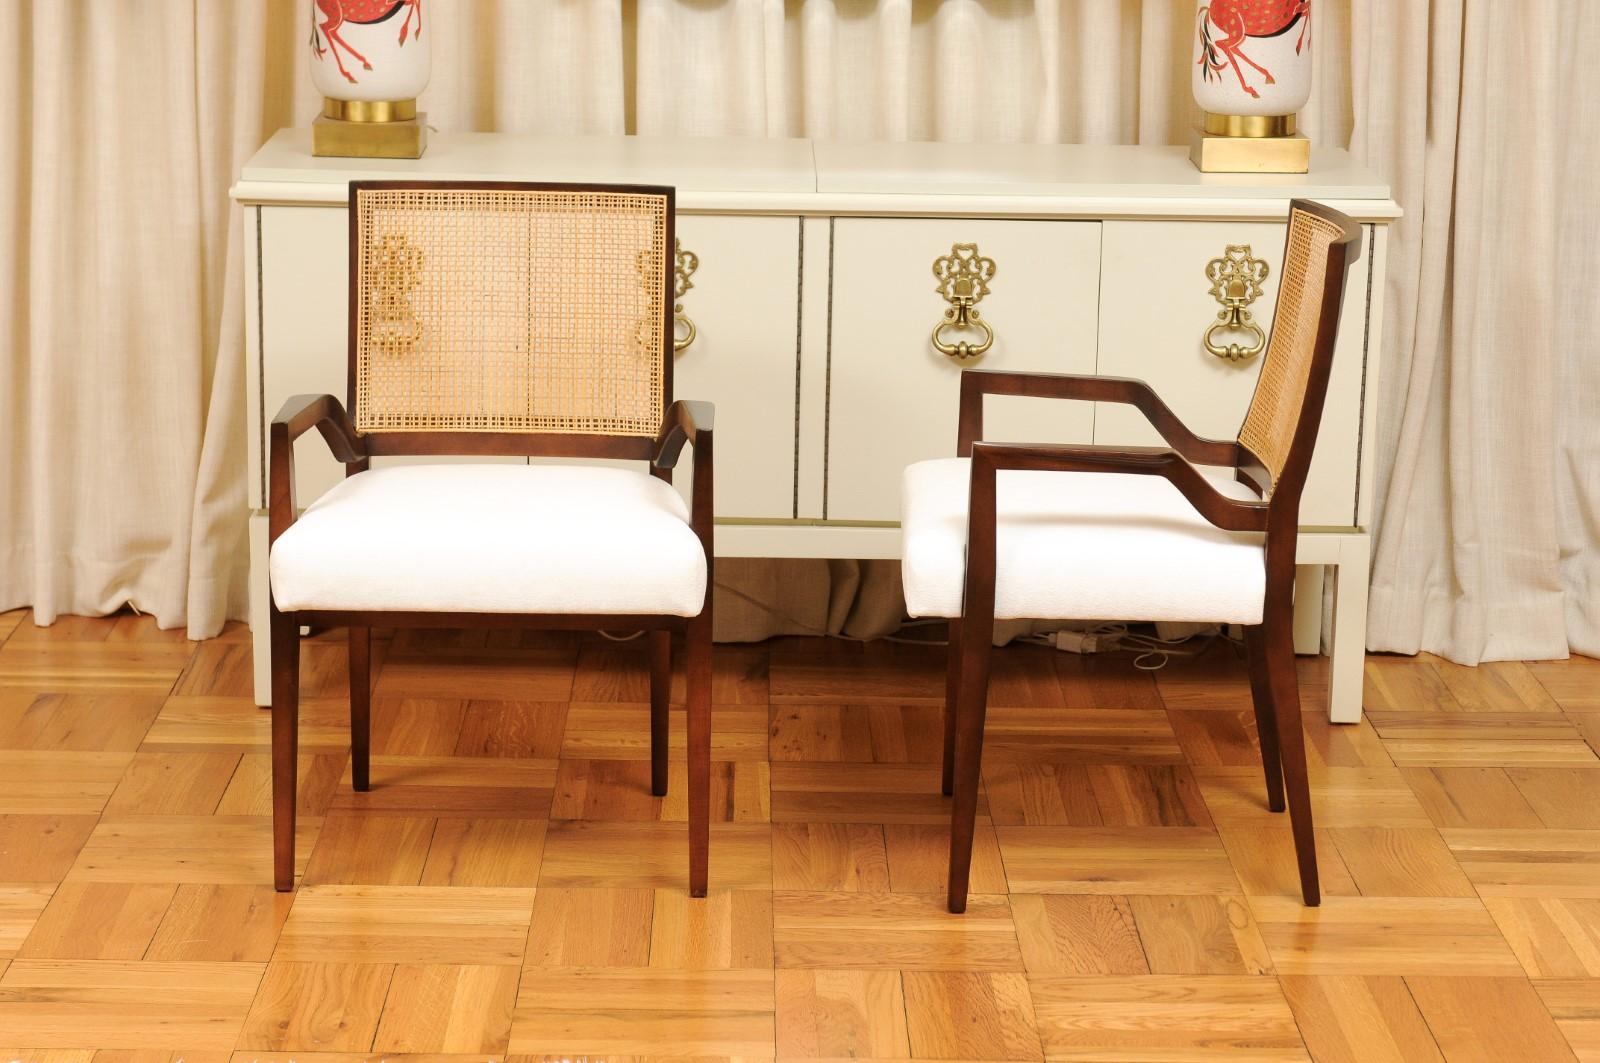 All Arms, Unrivaled Set of 14 Cane Dining Chairs by Michael Taylor, circa 1960 For Sale 4